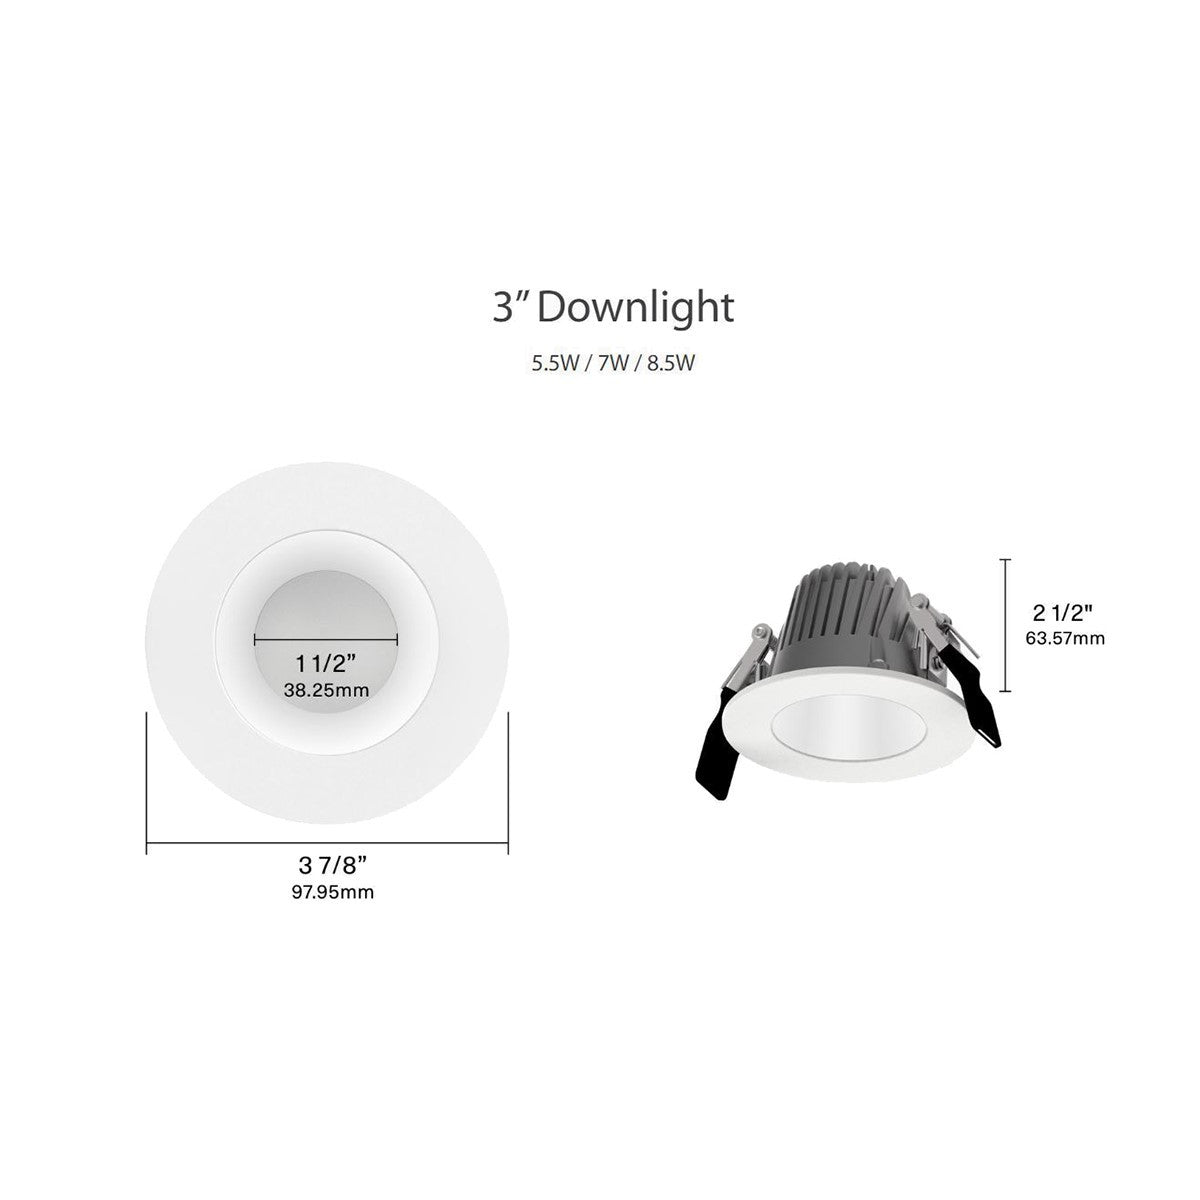 3 Inch LED Deep Regress Commercial Downlight, Field Adjustable 5.5/7.8/8.5W, 430/550/650 Lumens, 30/35/40/50K, Smooth Trim, White Finish